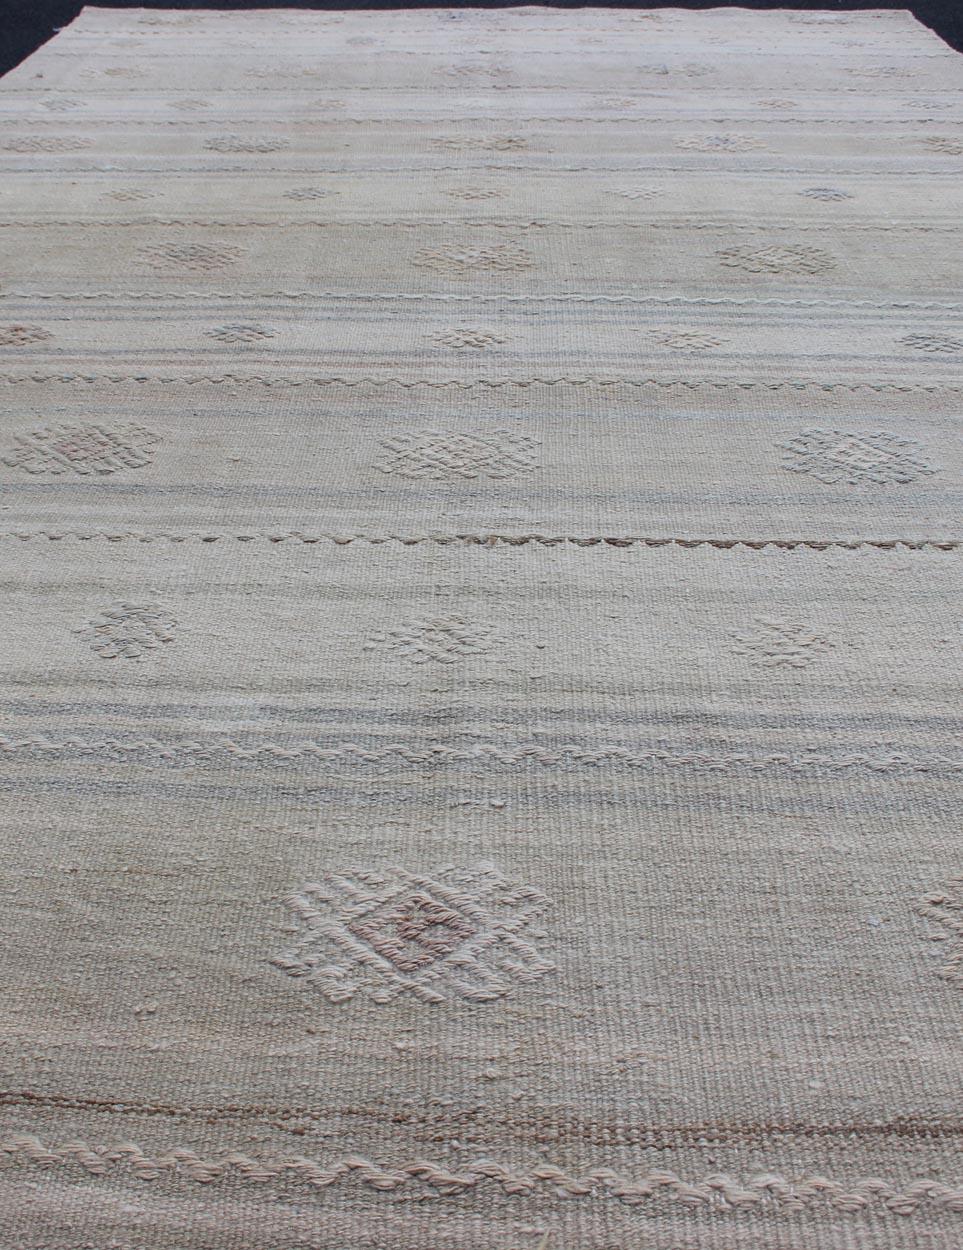 Hand-Woven Vintage Hand Woven Turkish Kilim Runner With Stripes in Gray and Natural Tones For Sale